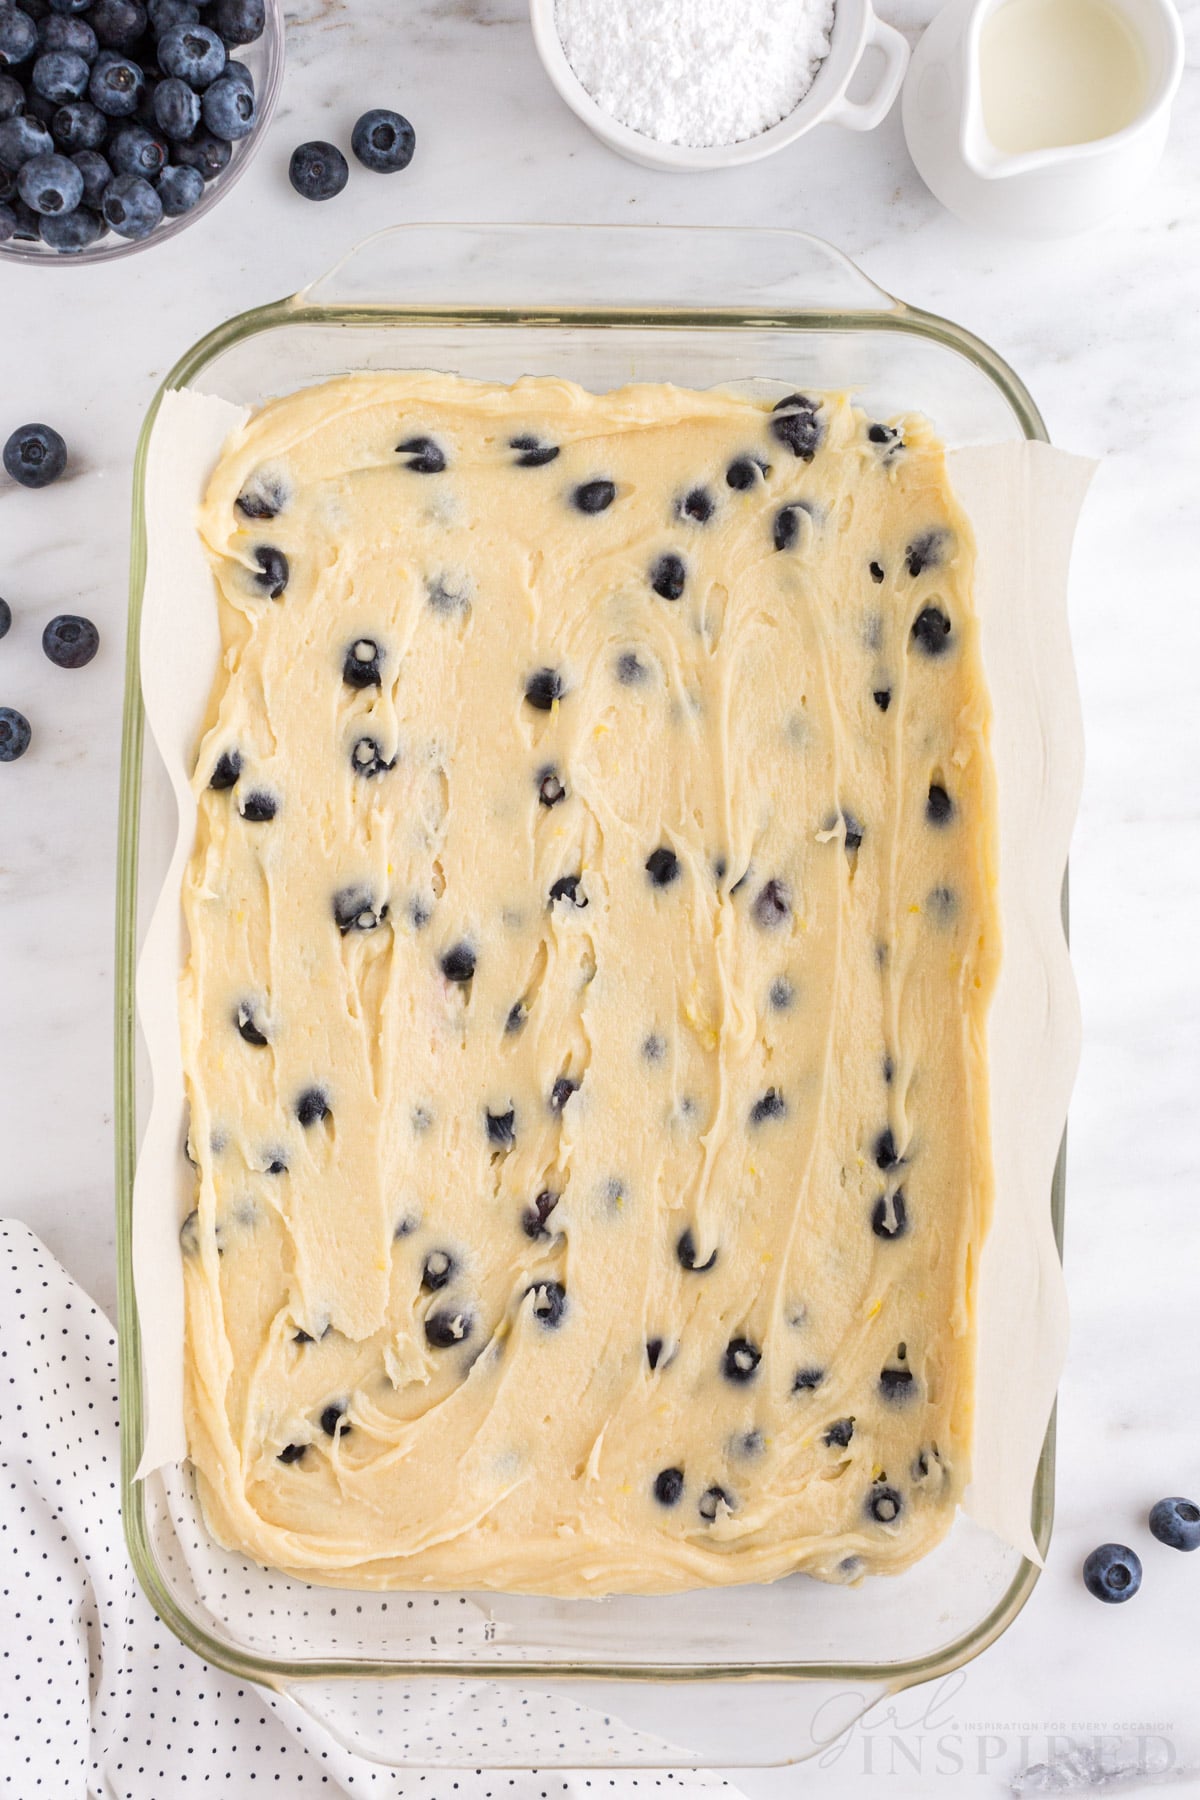 Glass baking dish lined with parchment paper and filled with blondie batter, fresh blueberries, polka dot linen, on a white marble countertop.